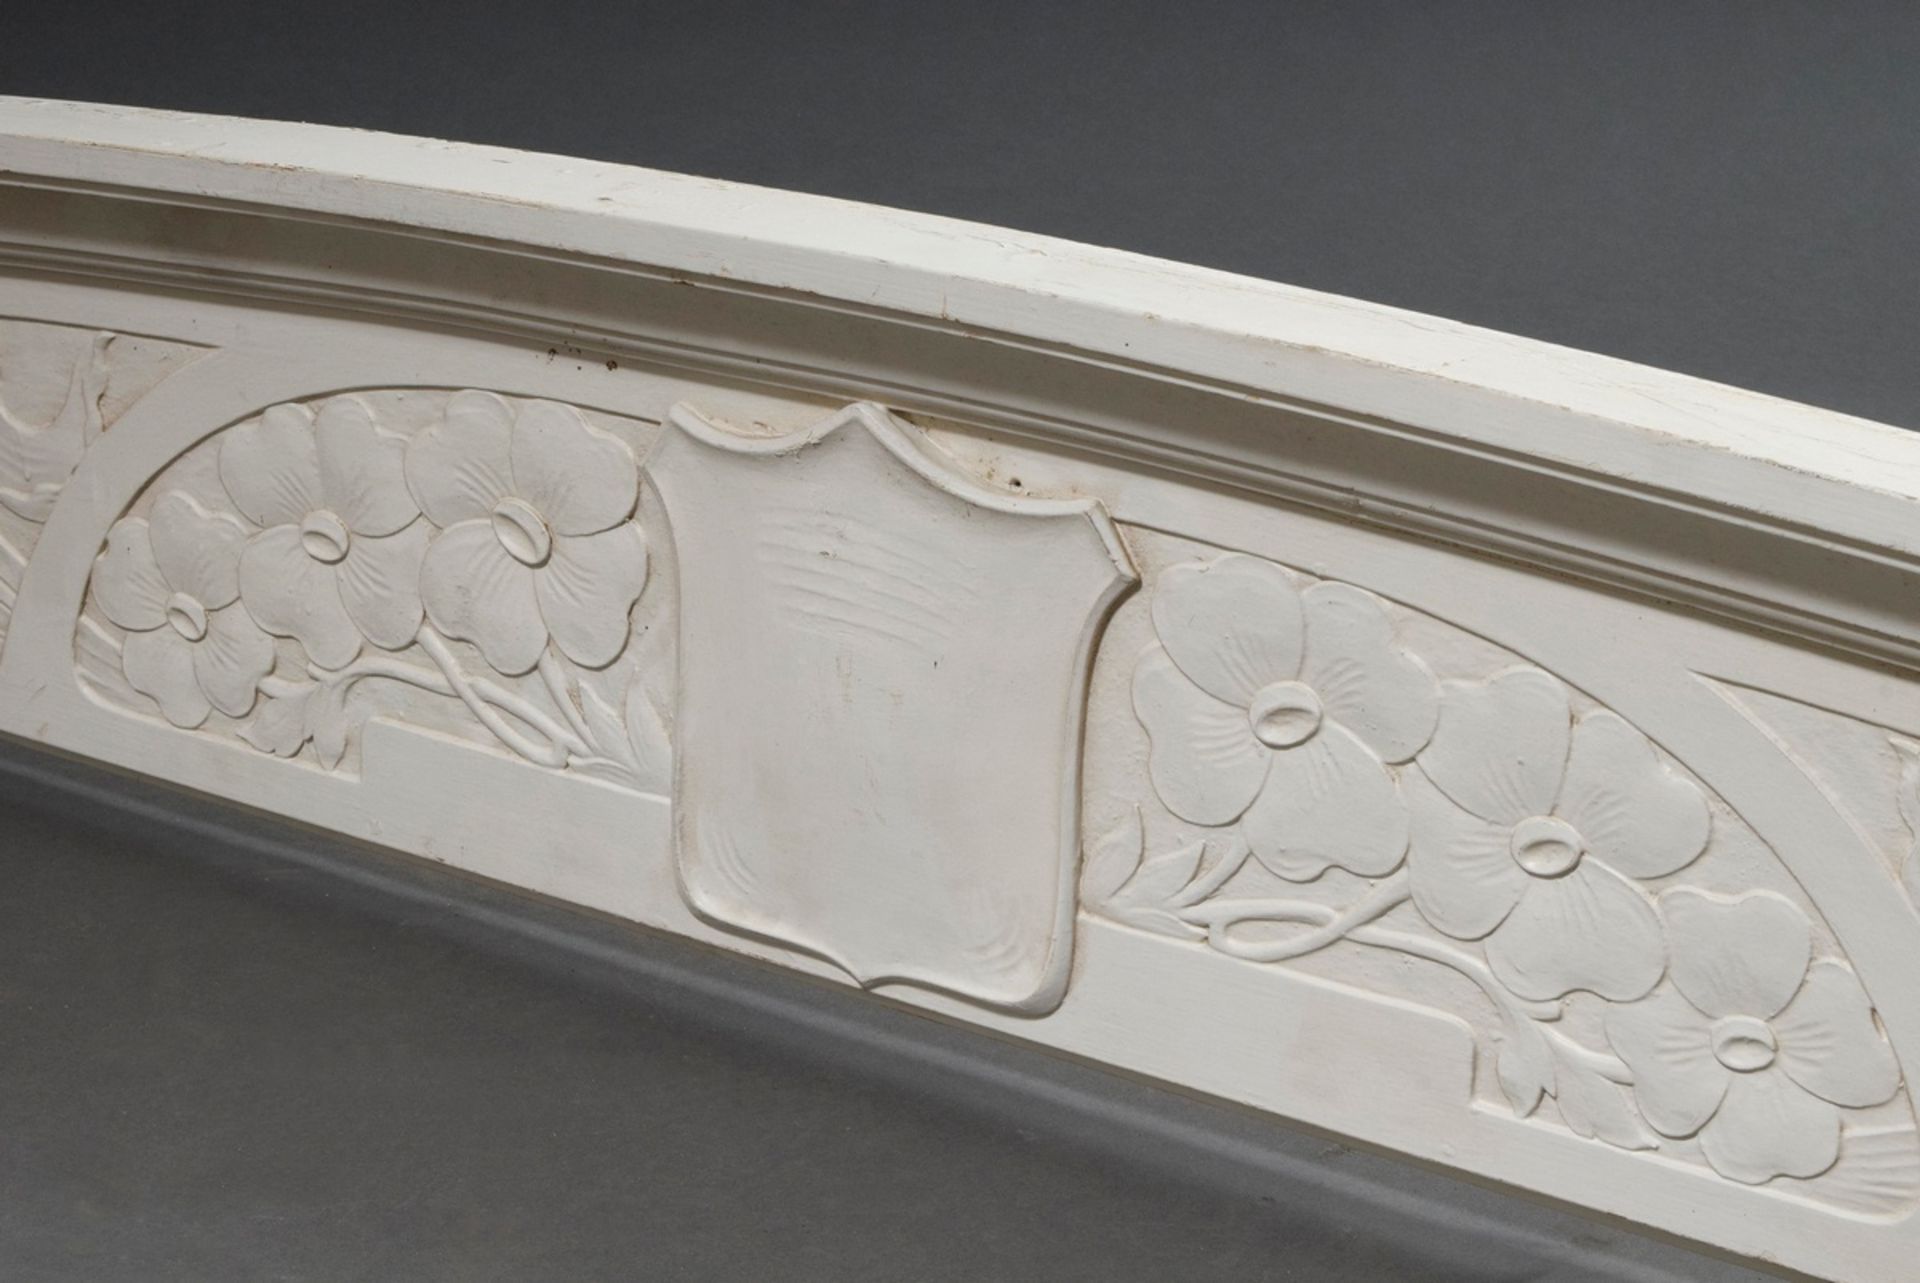 2 Art Nouveau supraports with arched finial and floral carving, white painted, Belgium c. 1900, 30x - Image 2 of 4